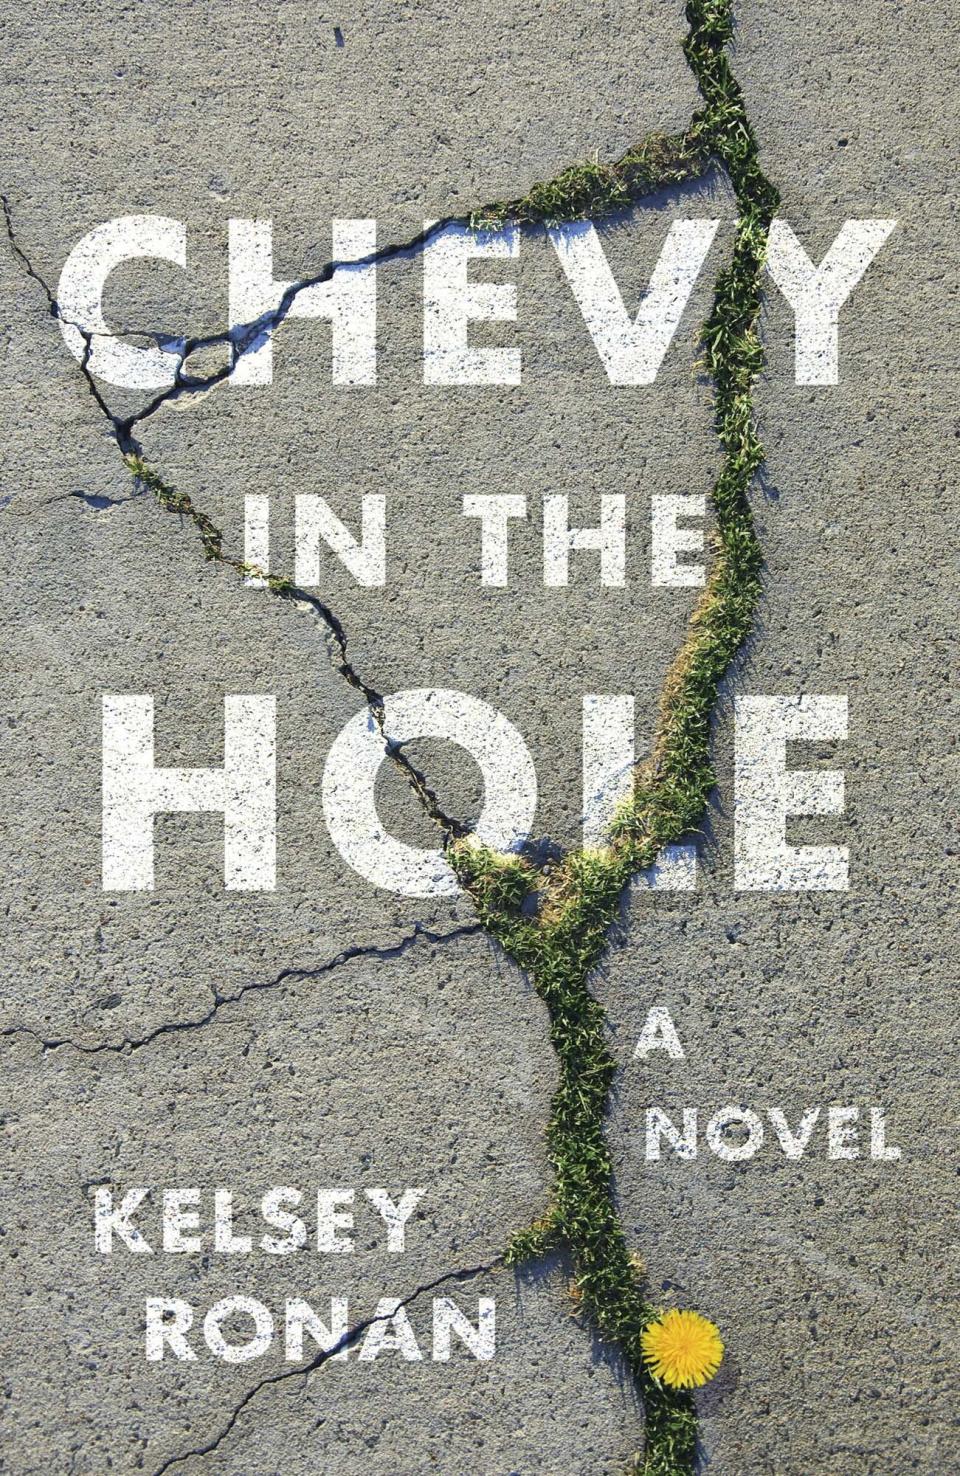 Chevy in the Hole by Kelsey Ronan